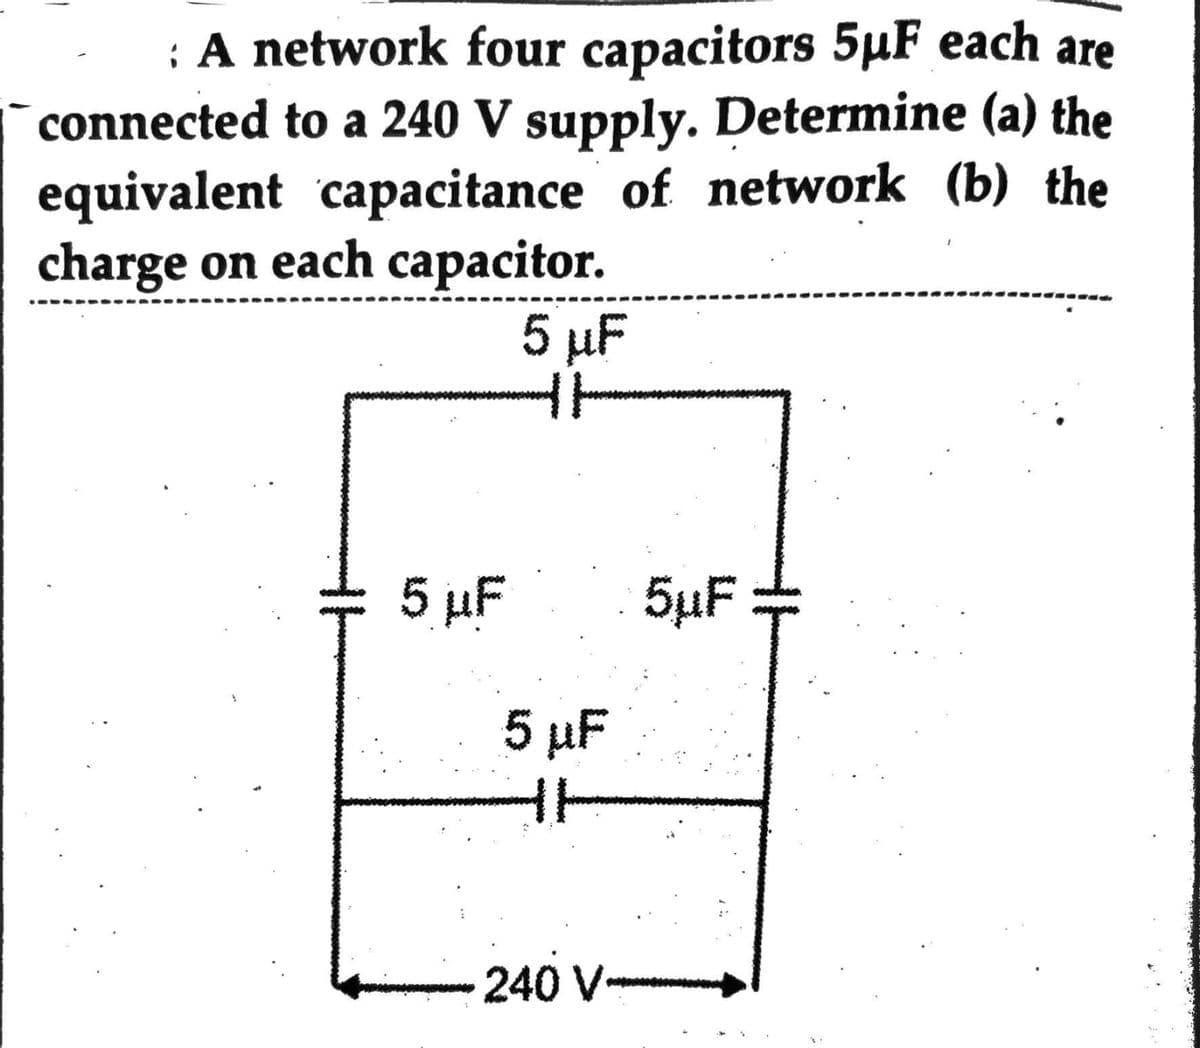 : A network four capacitors 5µF each are
connected to a 240 V supply. Determine (a) the
equivalent capacitance of network (b) the
charge on each capacitor.
5 µF
5 µF
5 μF
240 V
5µF =
T